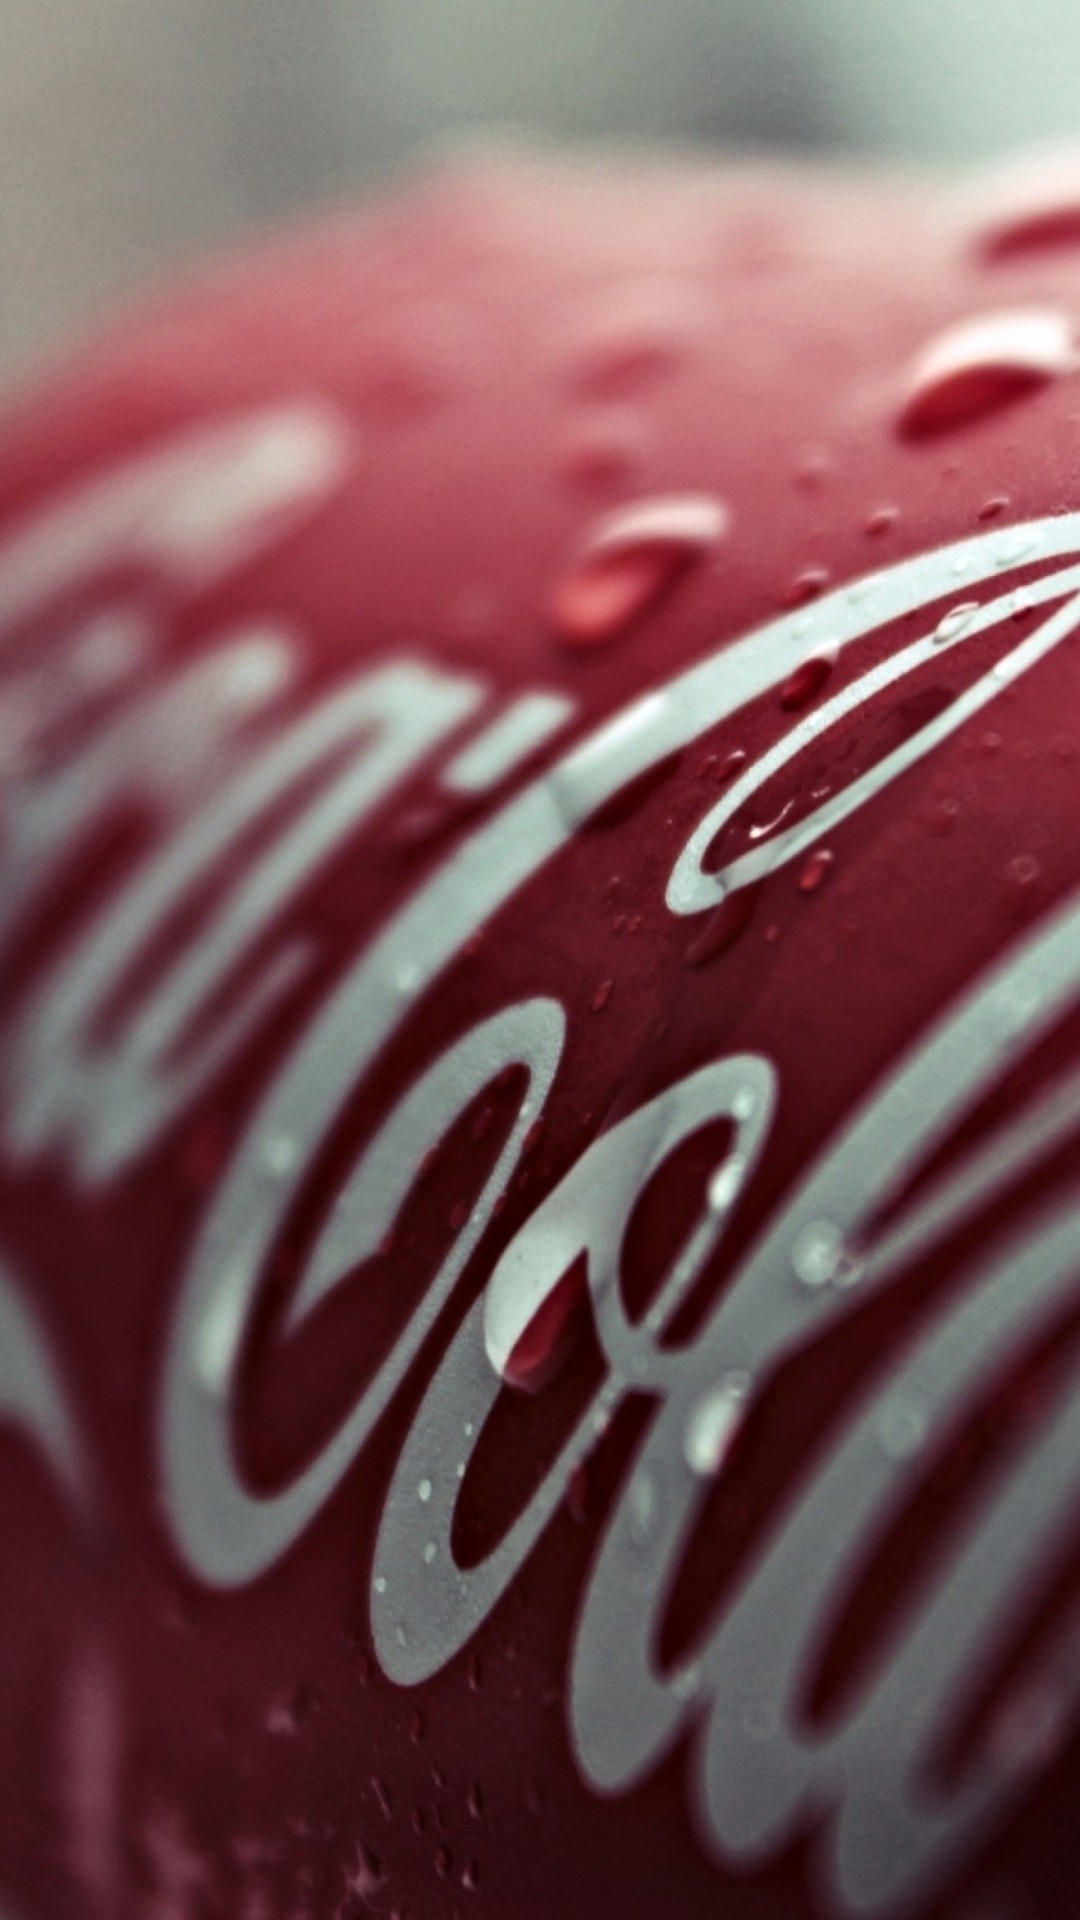 Coca Cola wallpaper for android